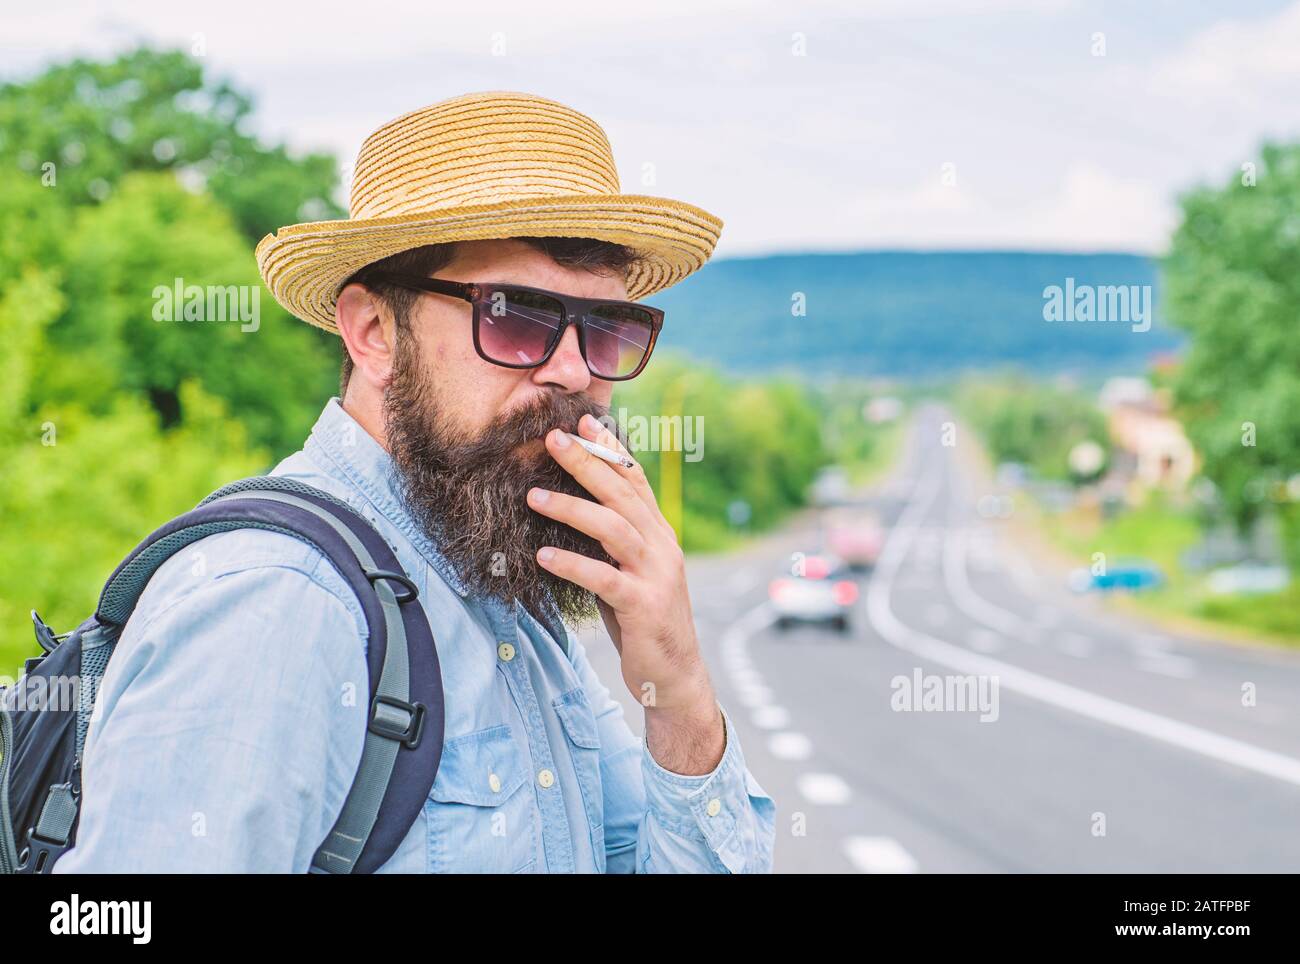 Old habit. Man with beard and mustache in straw hat smoking cigarette, road  background defocused. Traveler stylish hipster take brake with cigarette.  Smoking cigarette before long journey Stock Photo - Alamy